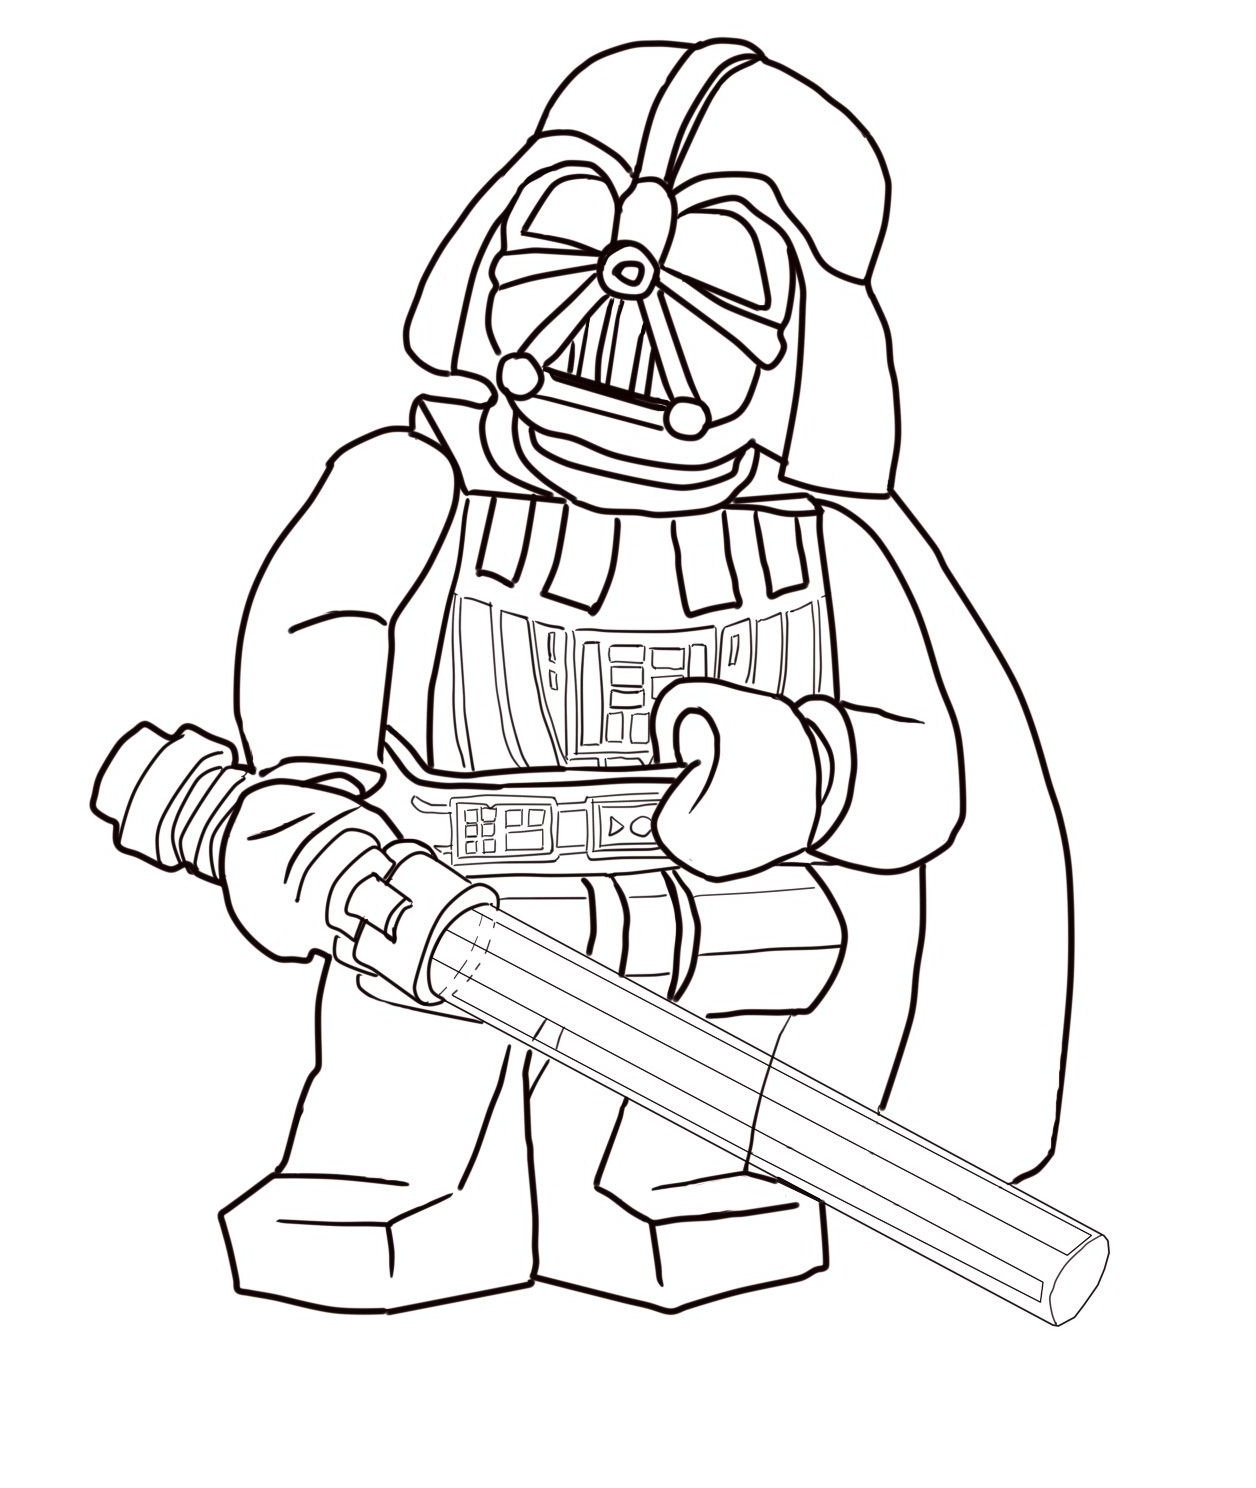 Darth Vader Coloring Pages - Free Printable Coloring Pages for Kids